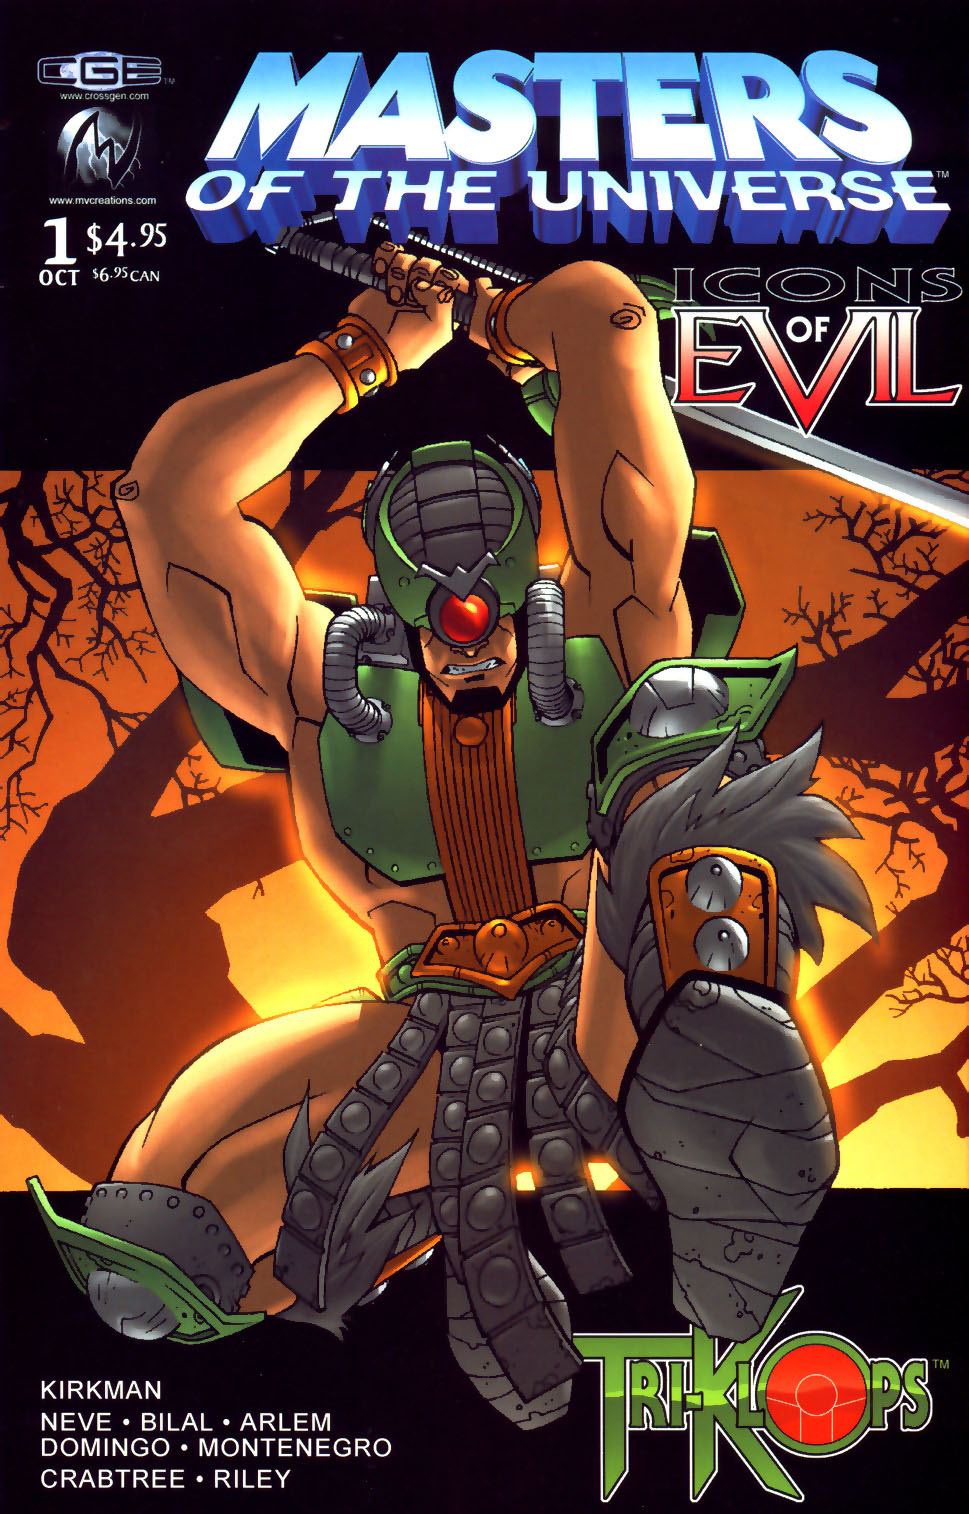 Read online Masters of the Universe: Icons of Evil comic -  Issue # Tri-Klops - 1